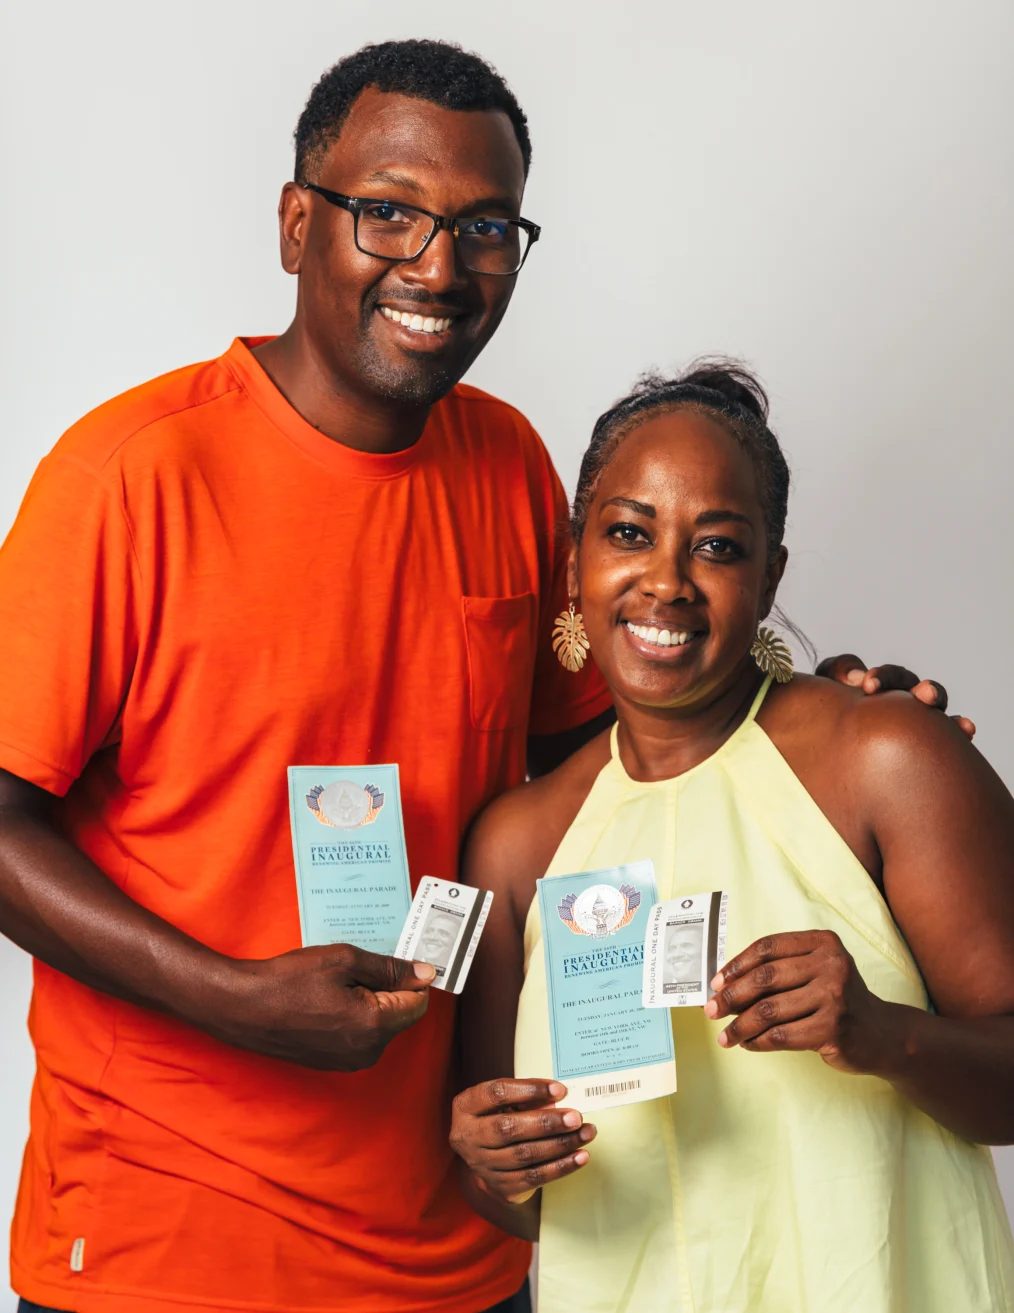 Ghian Foreman and his daughter smile and embrace, holding their metro passes to President Obama's inauguration.